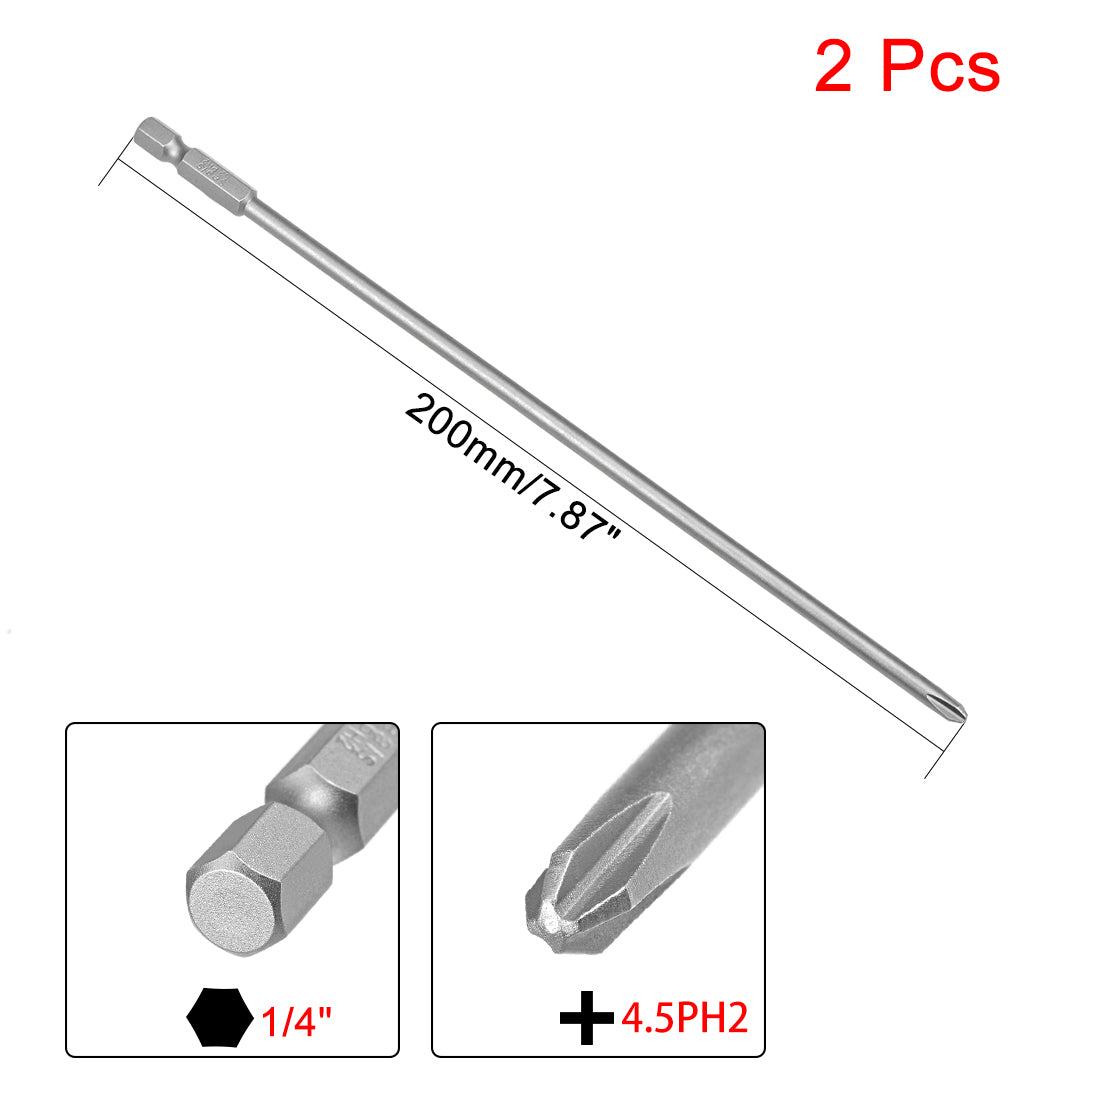 uxcell Uxcell 2Pcs 1/4-Inch Hex Shank 200mm Length Phillips 4.5PH2 Magnetic Screw Driver S2 Screwdriver Bits